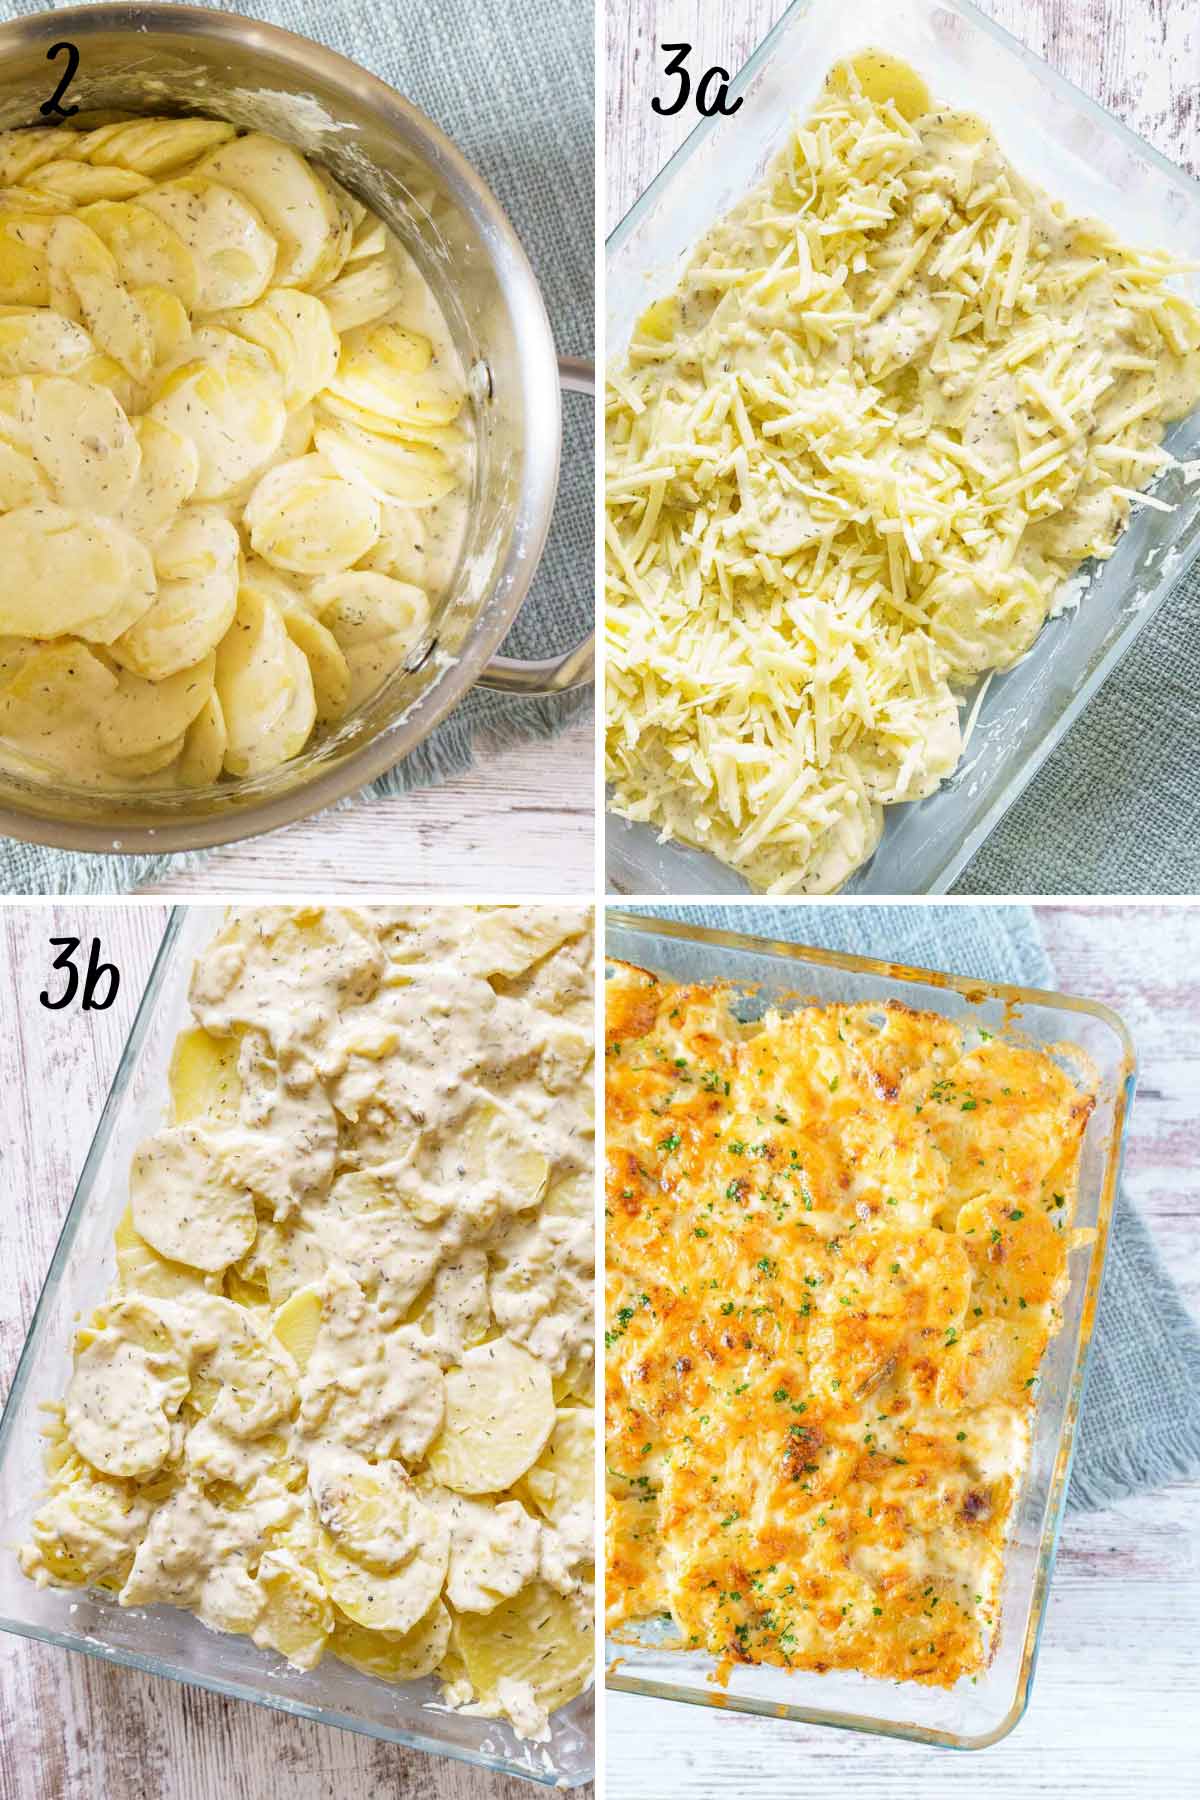 visual tutorial for making scalloped potatoes without flour. 